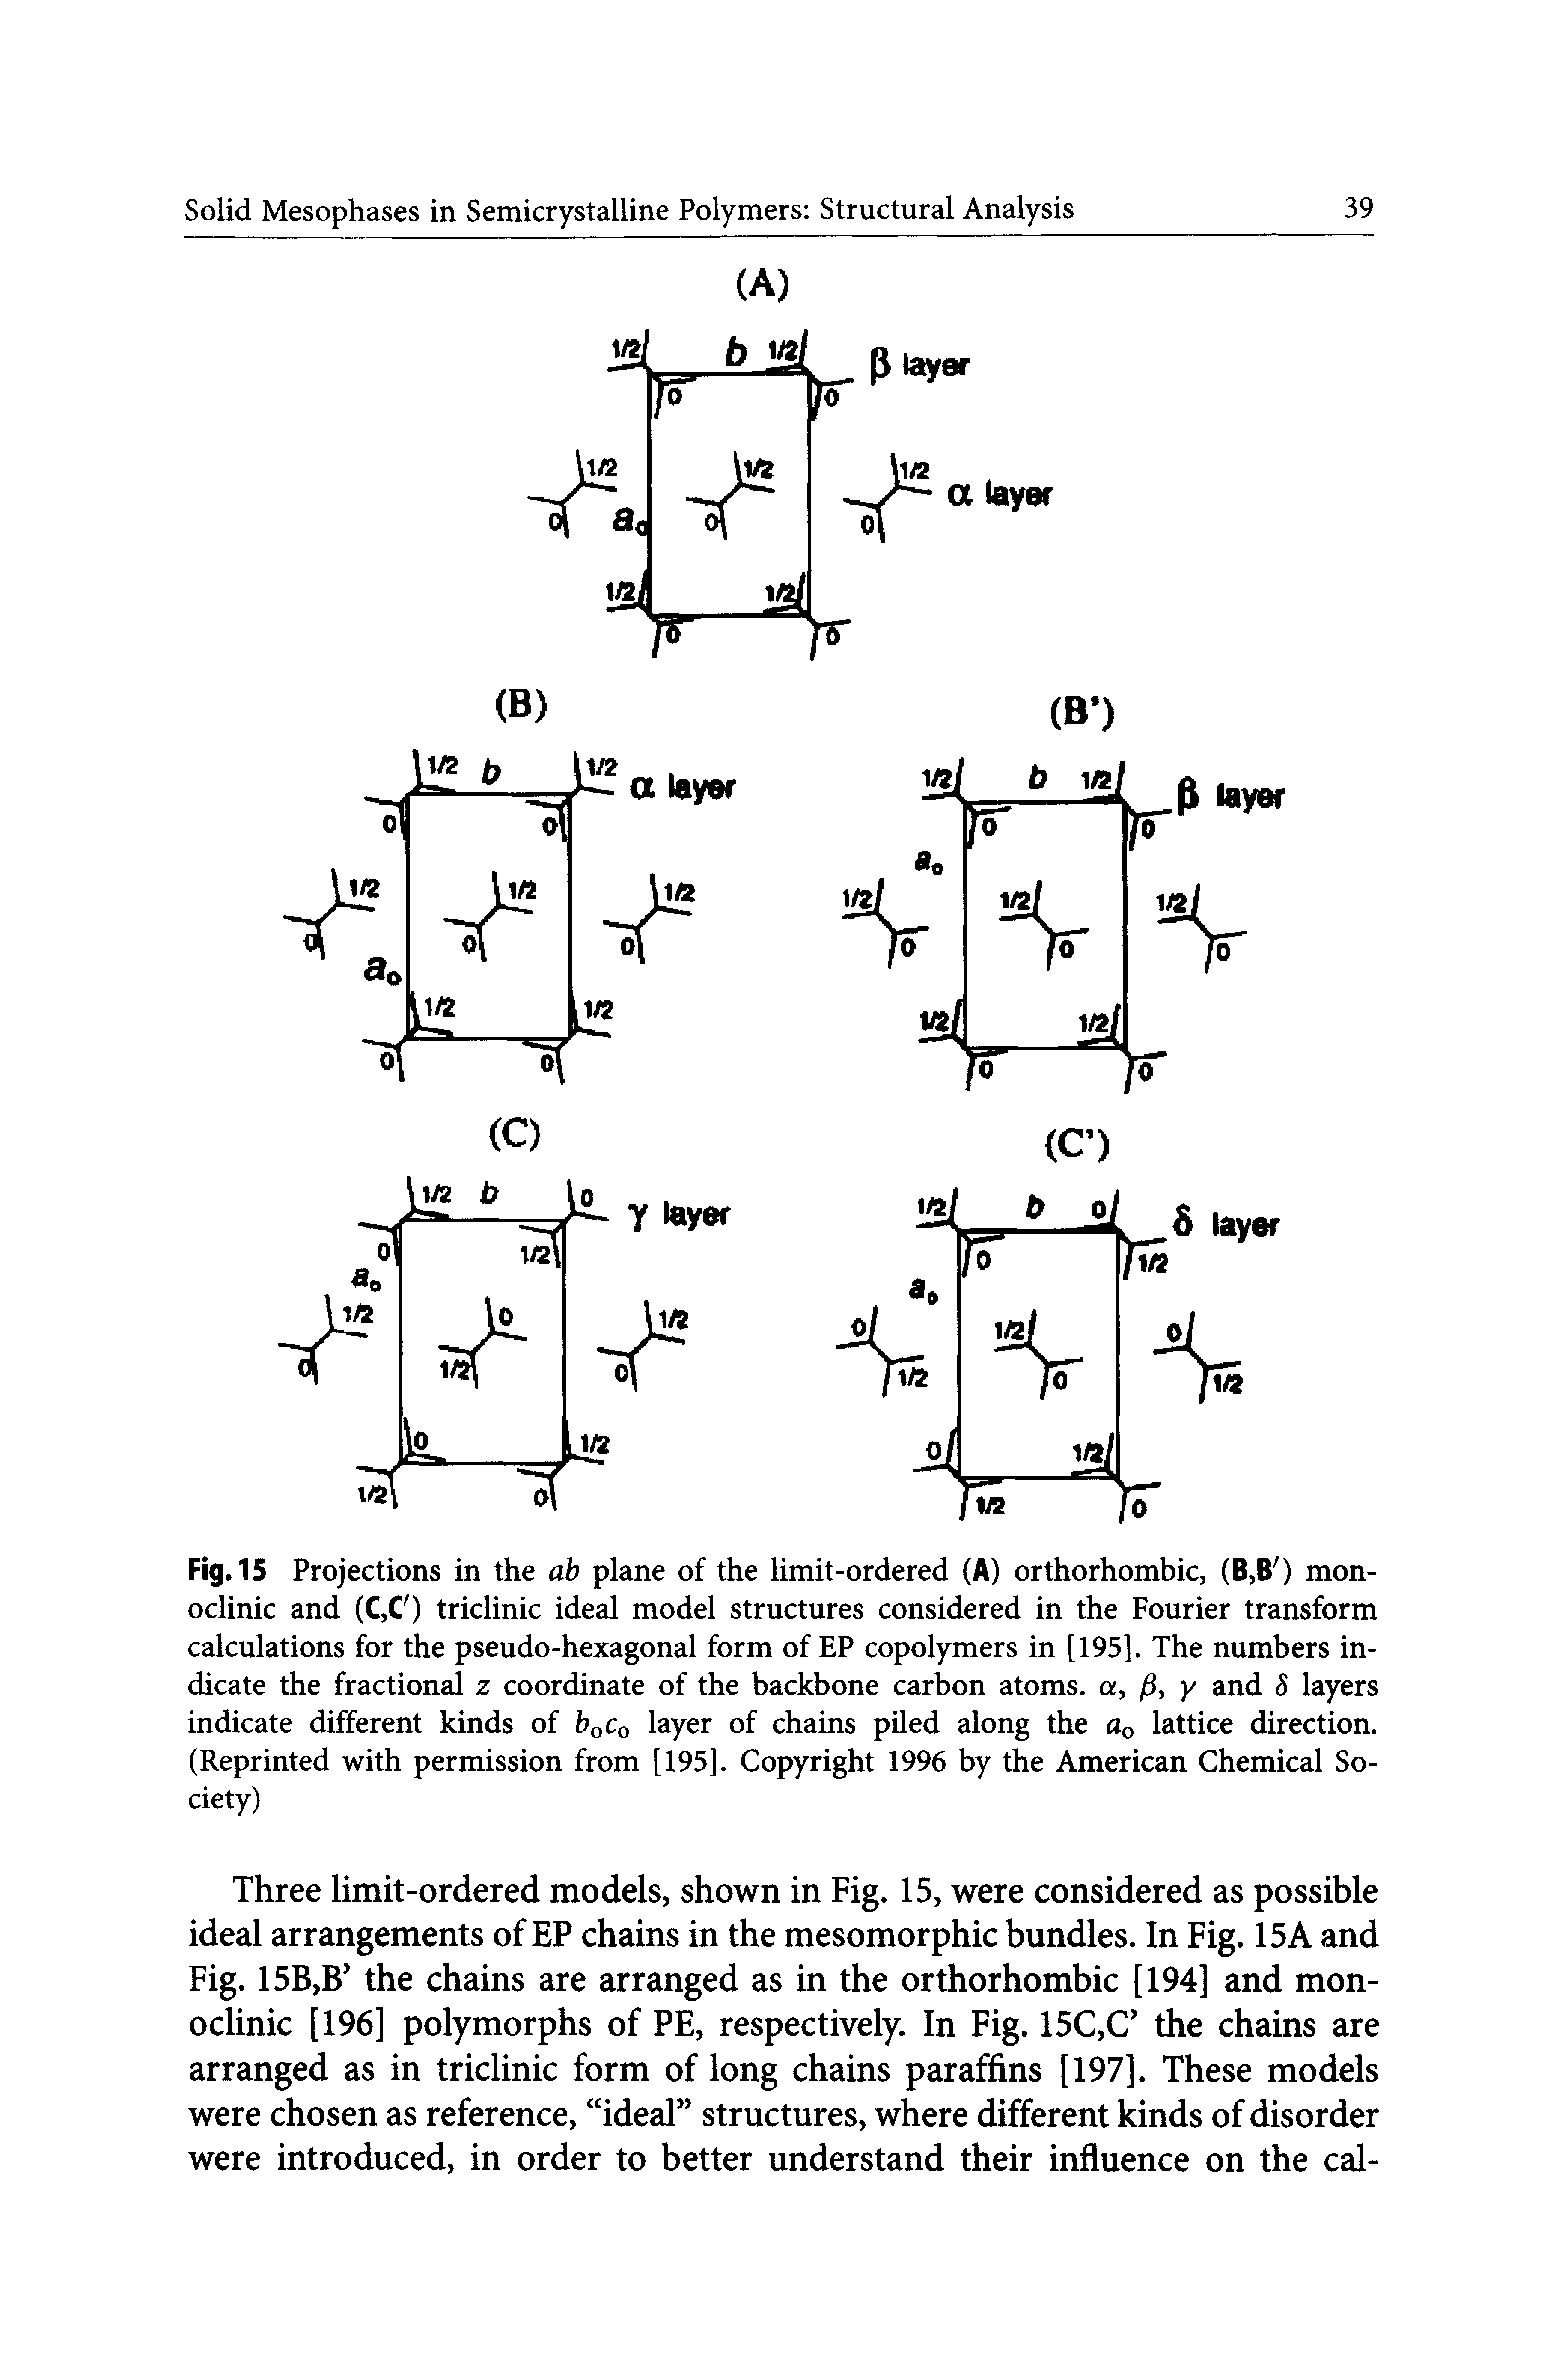 Fig. 15 Projections in the ab plane of the limit-ordered (A) orthorhombic, monoclinic and (C,C ) triclinic ideal model structures considered in the Fourier transform calculations for the pseudo-hexagonal form of EP copolymers in [195]. The numbers indicate the fractional z coordinate of the backbone carbon atoms, a, y and 8 layers indicate different kinds of boCo layer of chains piled along the a lattice direction. (Reprinted with permission from [195]. Copyright 1996 by the American Chemical Society)...